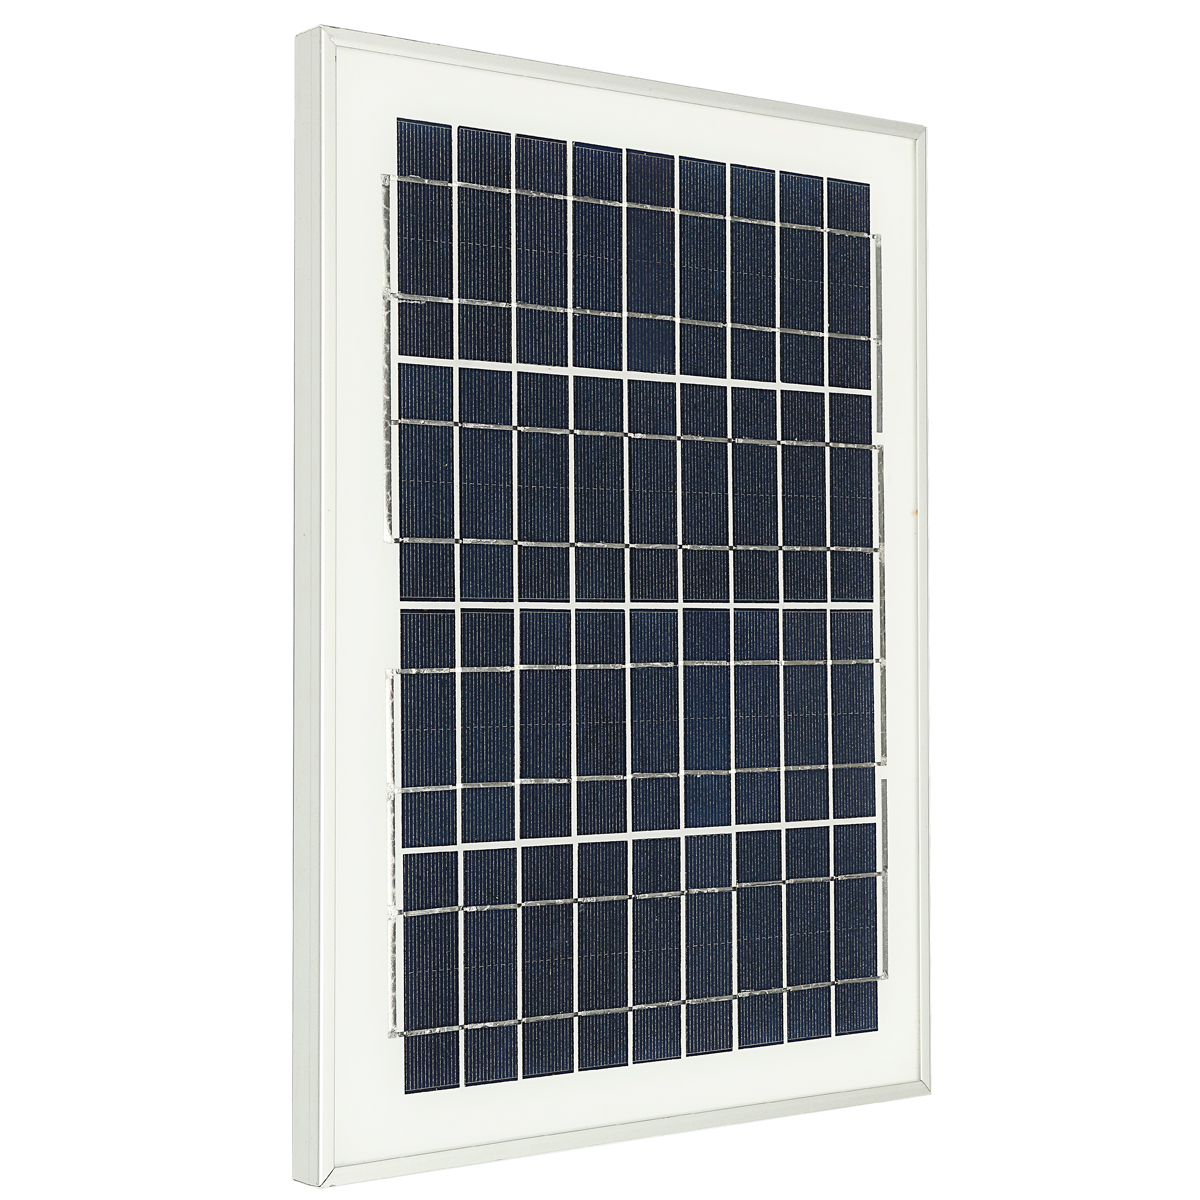 18V 10W Solar Panel For Outdoor Fountain Pond Pool Garden Submersible Water Pump With Crocodile Thre 14